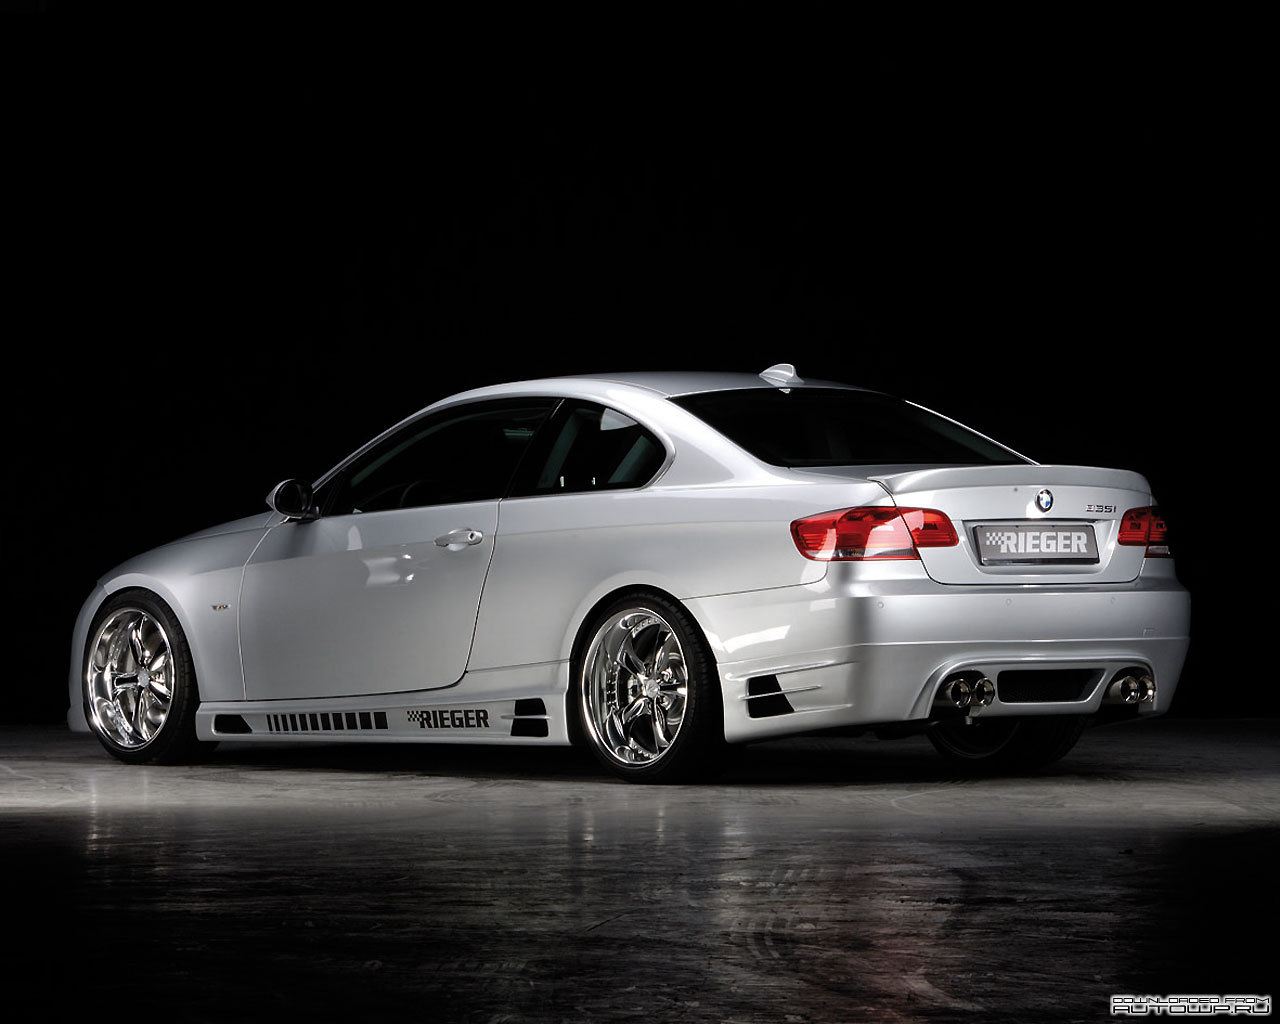 You can vote for this Rieger BMW 3-series Coupe (E92) photo